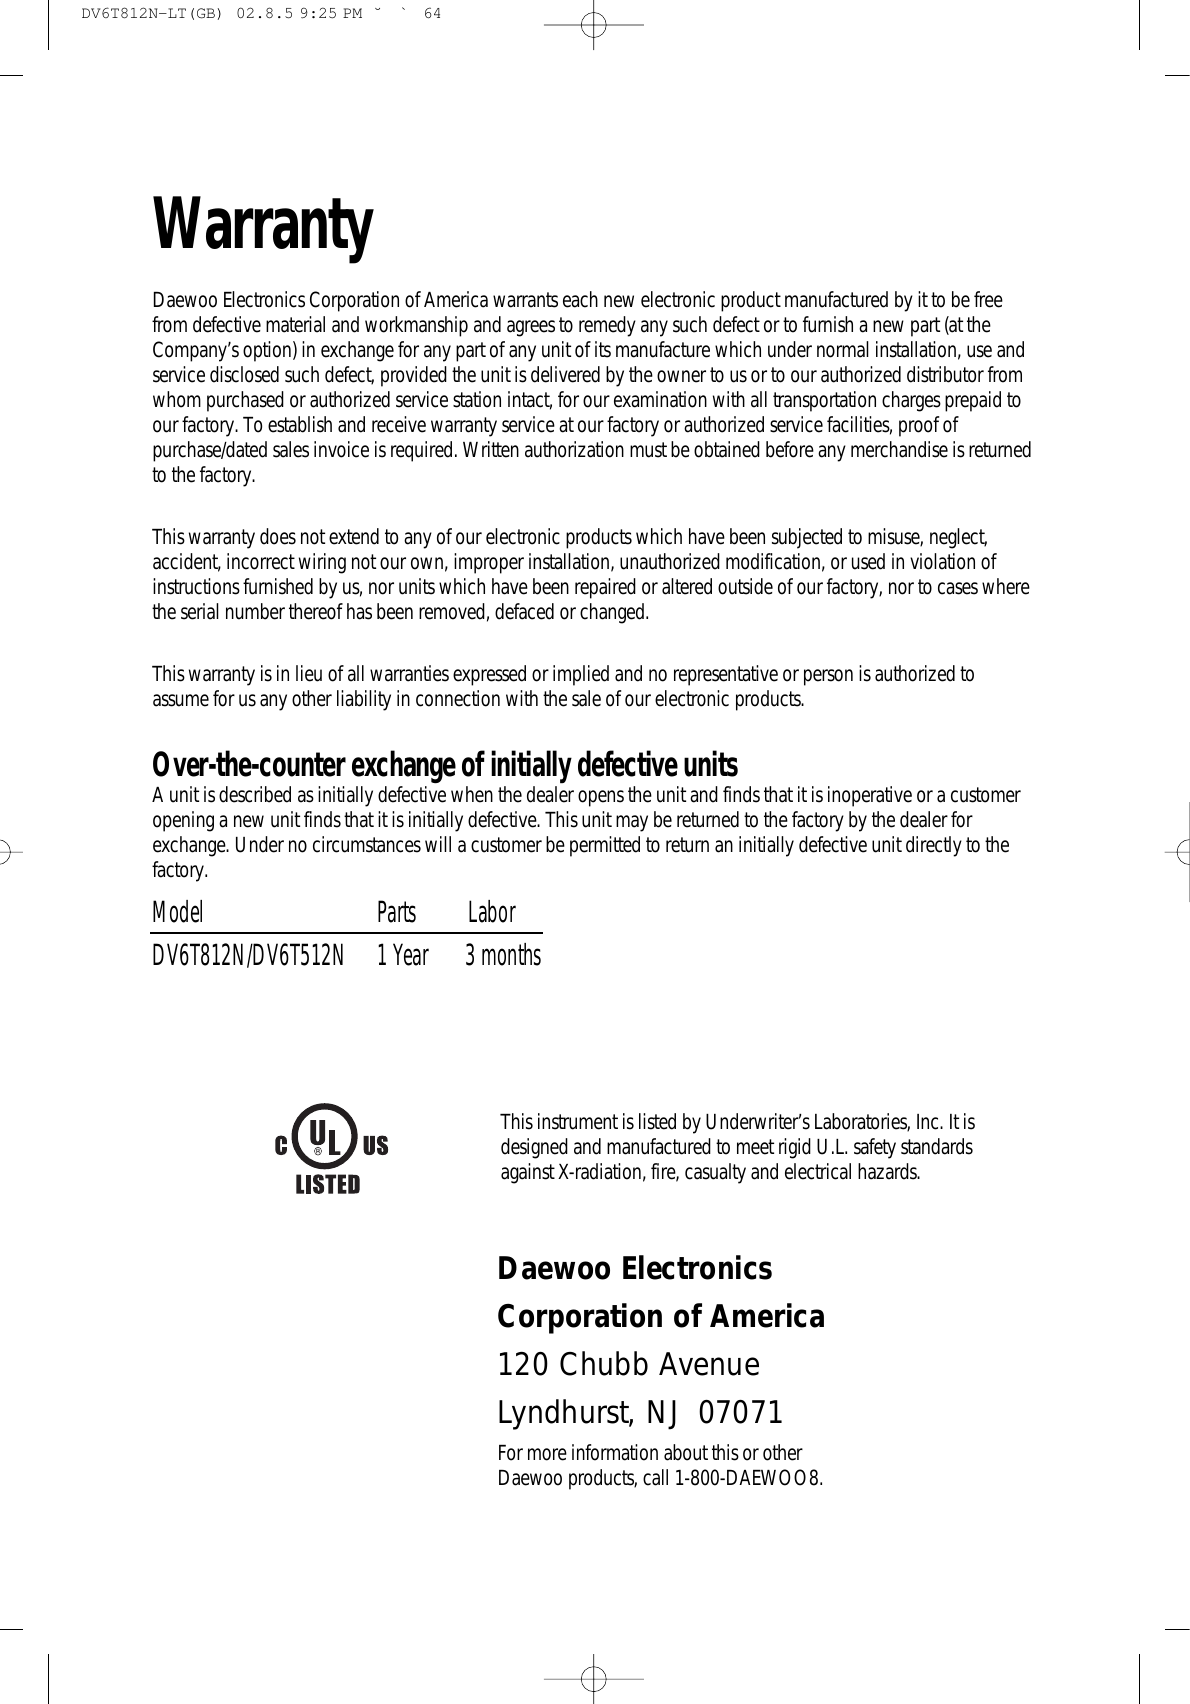 WarrantyDaewoo Electronics Corporation of America warrants each new electronic product manufactured by it to be freefrom defective material and workmanship and agrees to remedy any such defect or to furnish a new part (at theCompany’s option) in exchange for any part of any unit of its manufacture which under normal installation, use andservice disclosed such defect, provided the unit is delivered by the owner to us or to our authorized distributor fromwhom purchased or authorized service station intact, for our examination with all transportation charges prepaid toour factory. To establish and receive warranty service at our factory or authorized service facilities, proof ofpurchase/dated sales invoice is required. Written authorization must be obtained before any merchandise is returnedto the factory.This warranty does not extend to any of our electronic products which have been subjected to misuse, neglect,accident, incorrect wiring not our own, improper installation, unauthorized modification, or used in violation ofinstructions furnished by us, nor units which have been repaired or altered outside of our factory, nor to cases wherethe serial number thereof has been removed, defaced or changed.This warranty is in lieu of all warranties expressed or implied and no representative or person is authorized toassume for us any other liability in connection with the sale of our electronic products.Over-the-counter exchange of initially defective unitsA unit is described as initially defective when the dealer opens the unit and finds that it is inoperative or a customeropening a new unit finds that it is initially defective. This unit may be returned to the factory by the dealer forexchange. Under no circumstances will a customer be permitted to return an initially defective unit directly to thefactory.Model Parts          LaborDV6T812N/DV6T512N 1 Year       3 monthsThis instrument is listed by Underwriter’s Laboratories, Inc. It isdesigned and manufactured to meet rigid U.L. safety standardsagainst X-radiation, fire, casualty and electrical hazards.Daewoo Electronics Corporation of America120 Chubb AvenueLyndhurst, NJ  07071For more information about this or other Daewoo products, call 1-800-DAEWOO8.DV6T812N-LT(GB)  02.8.5 9:25 PM  ˘`64